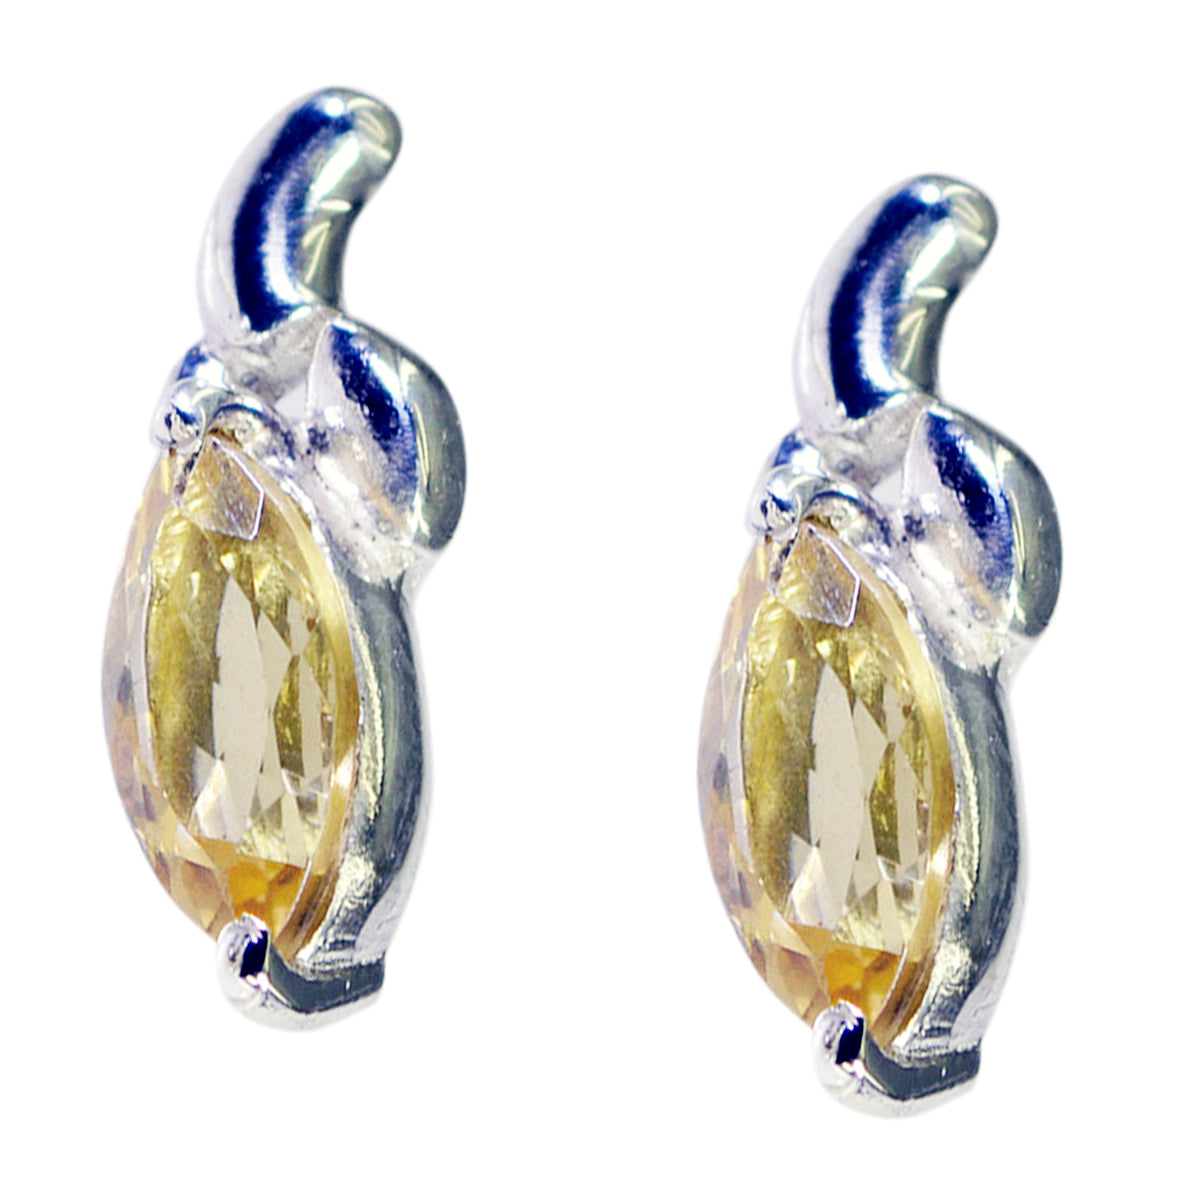 Riyo Real Gemstones Marquise Faceted Yellow Citrine Silver Earring easter Sunday gift